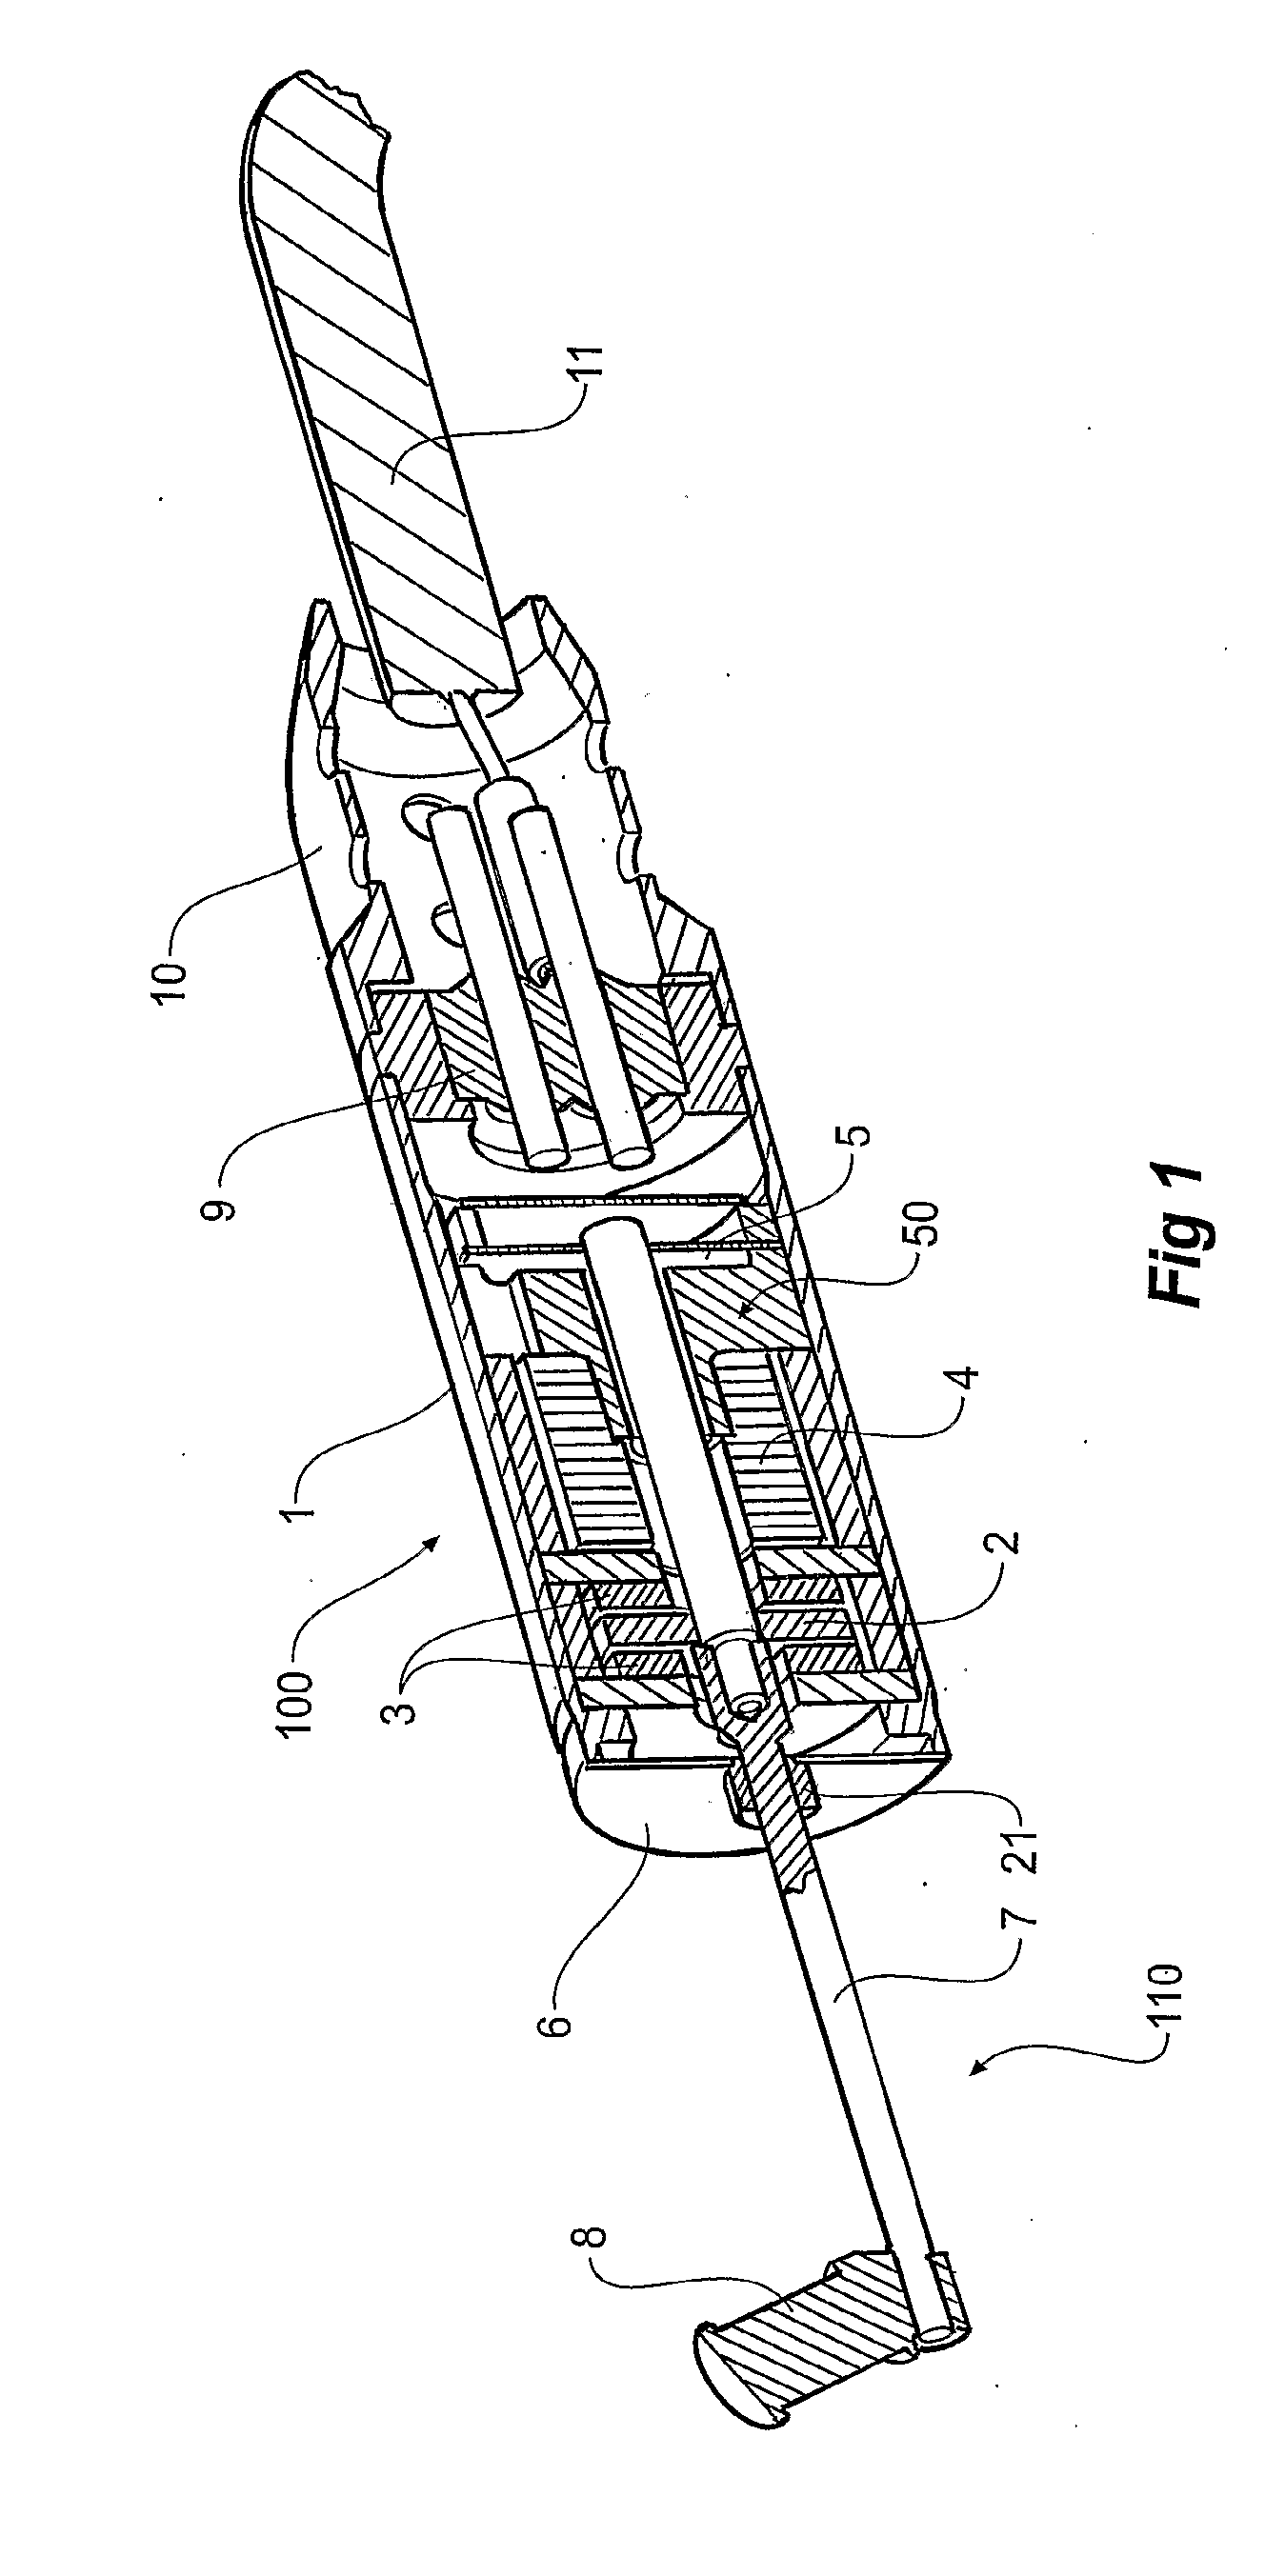 Implantable actuator for hearing aid application